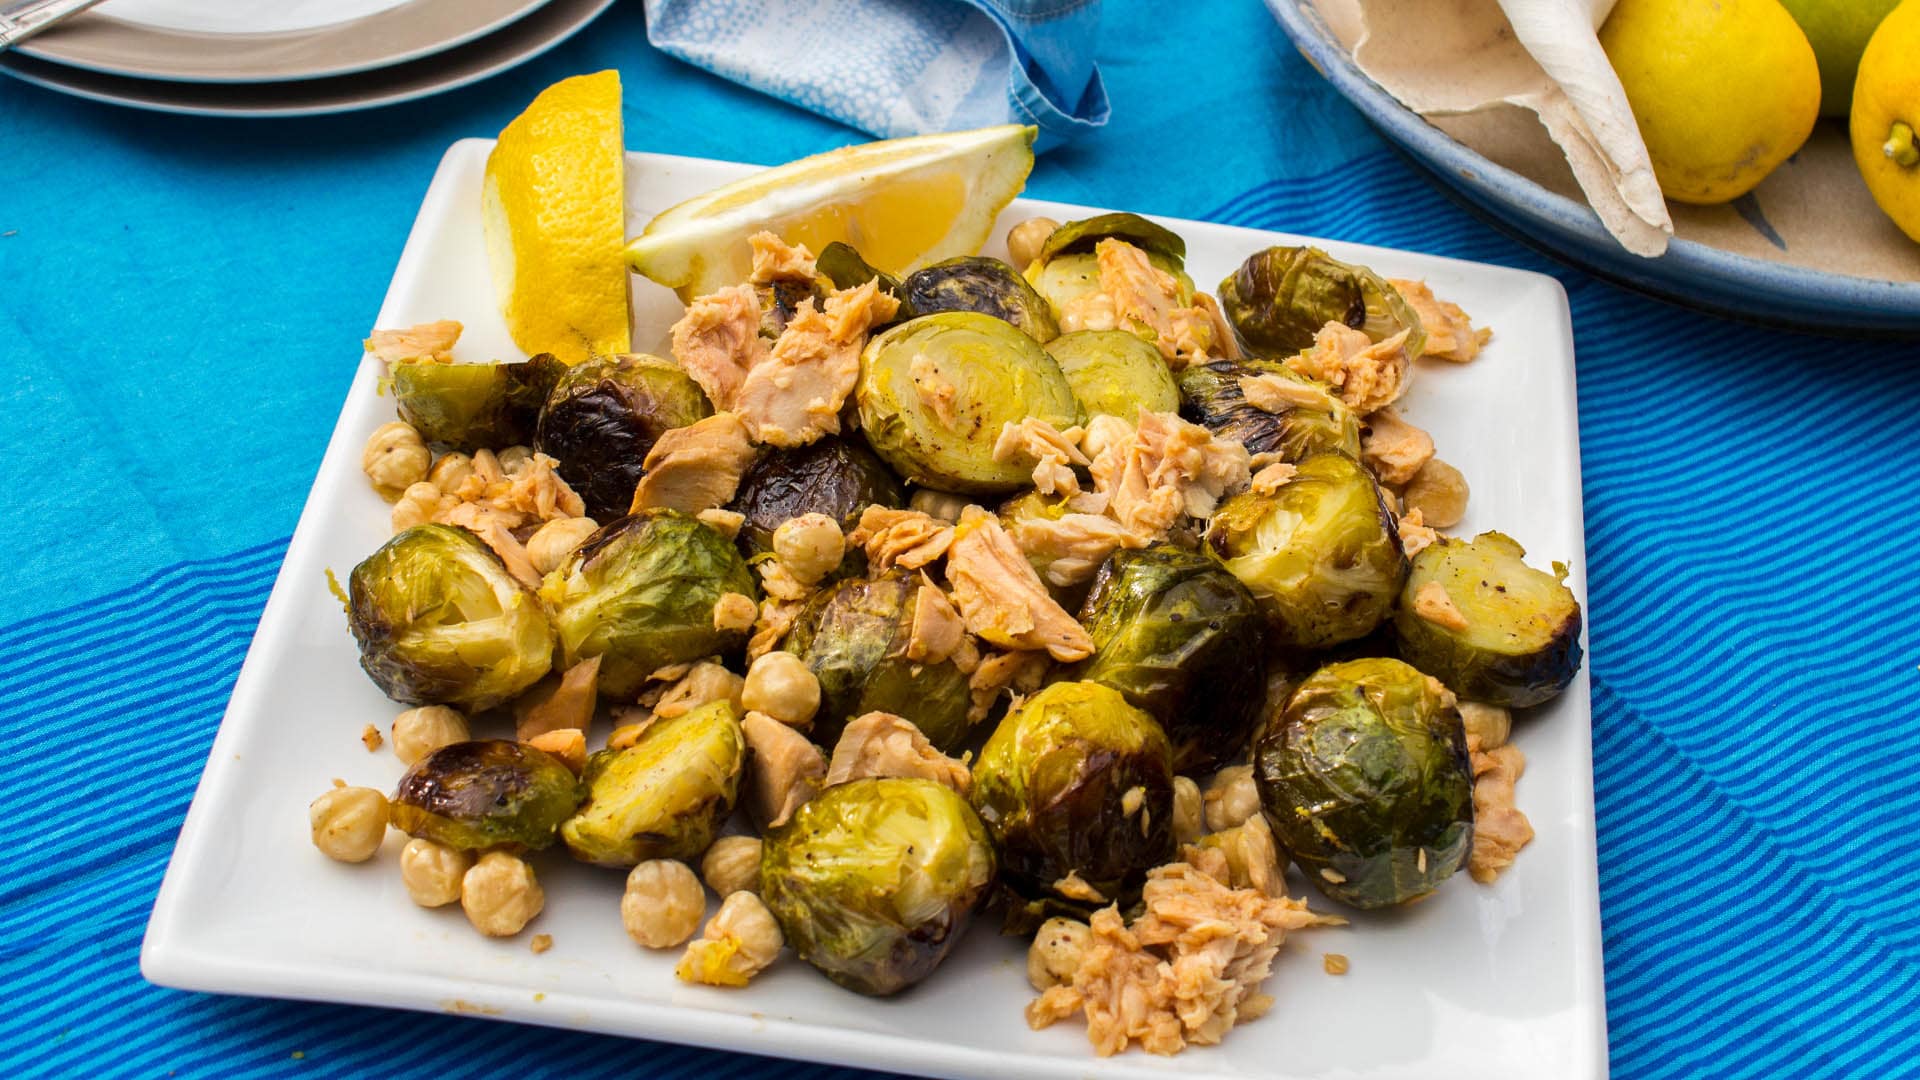 Roasted brussel sprouts with smoked salmon